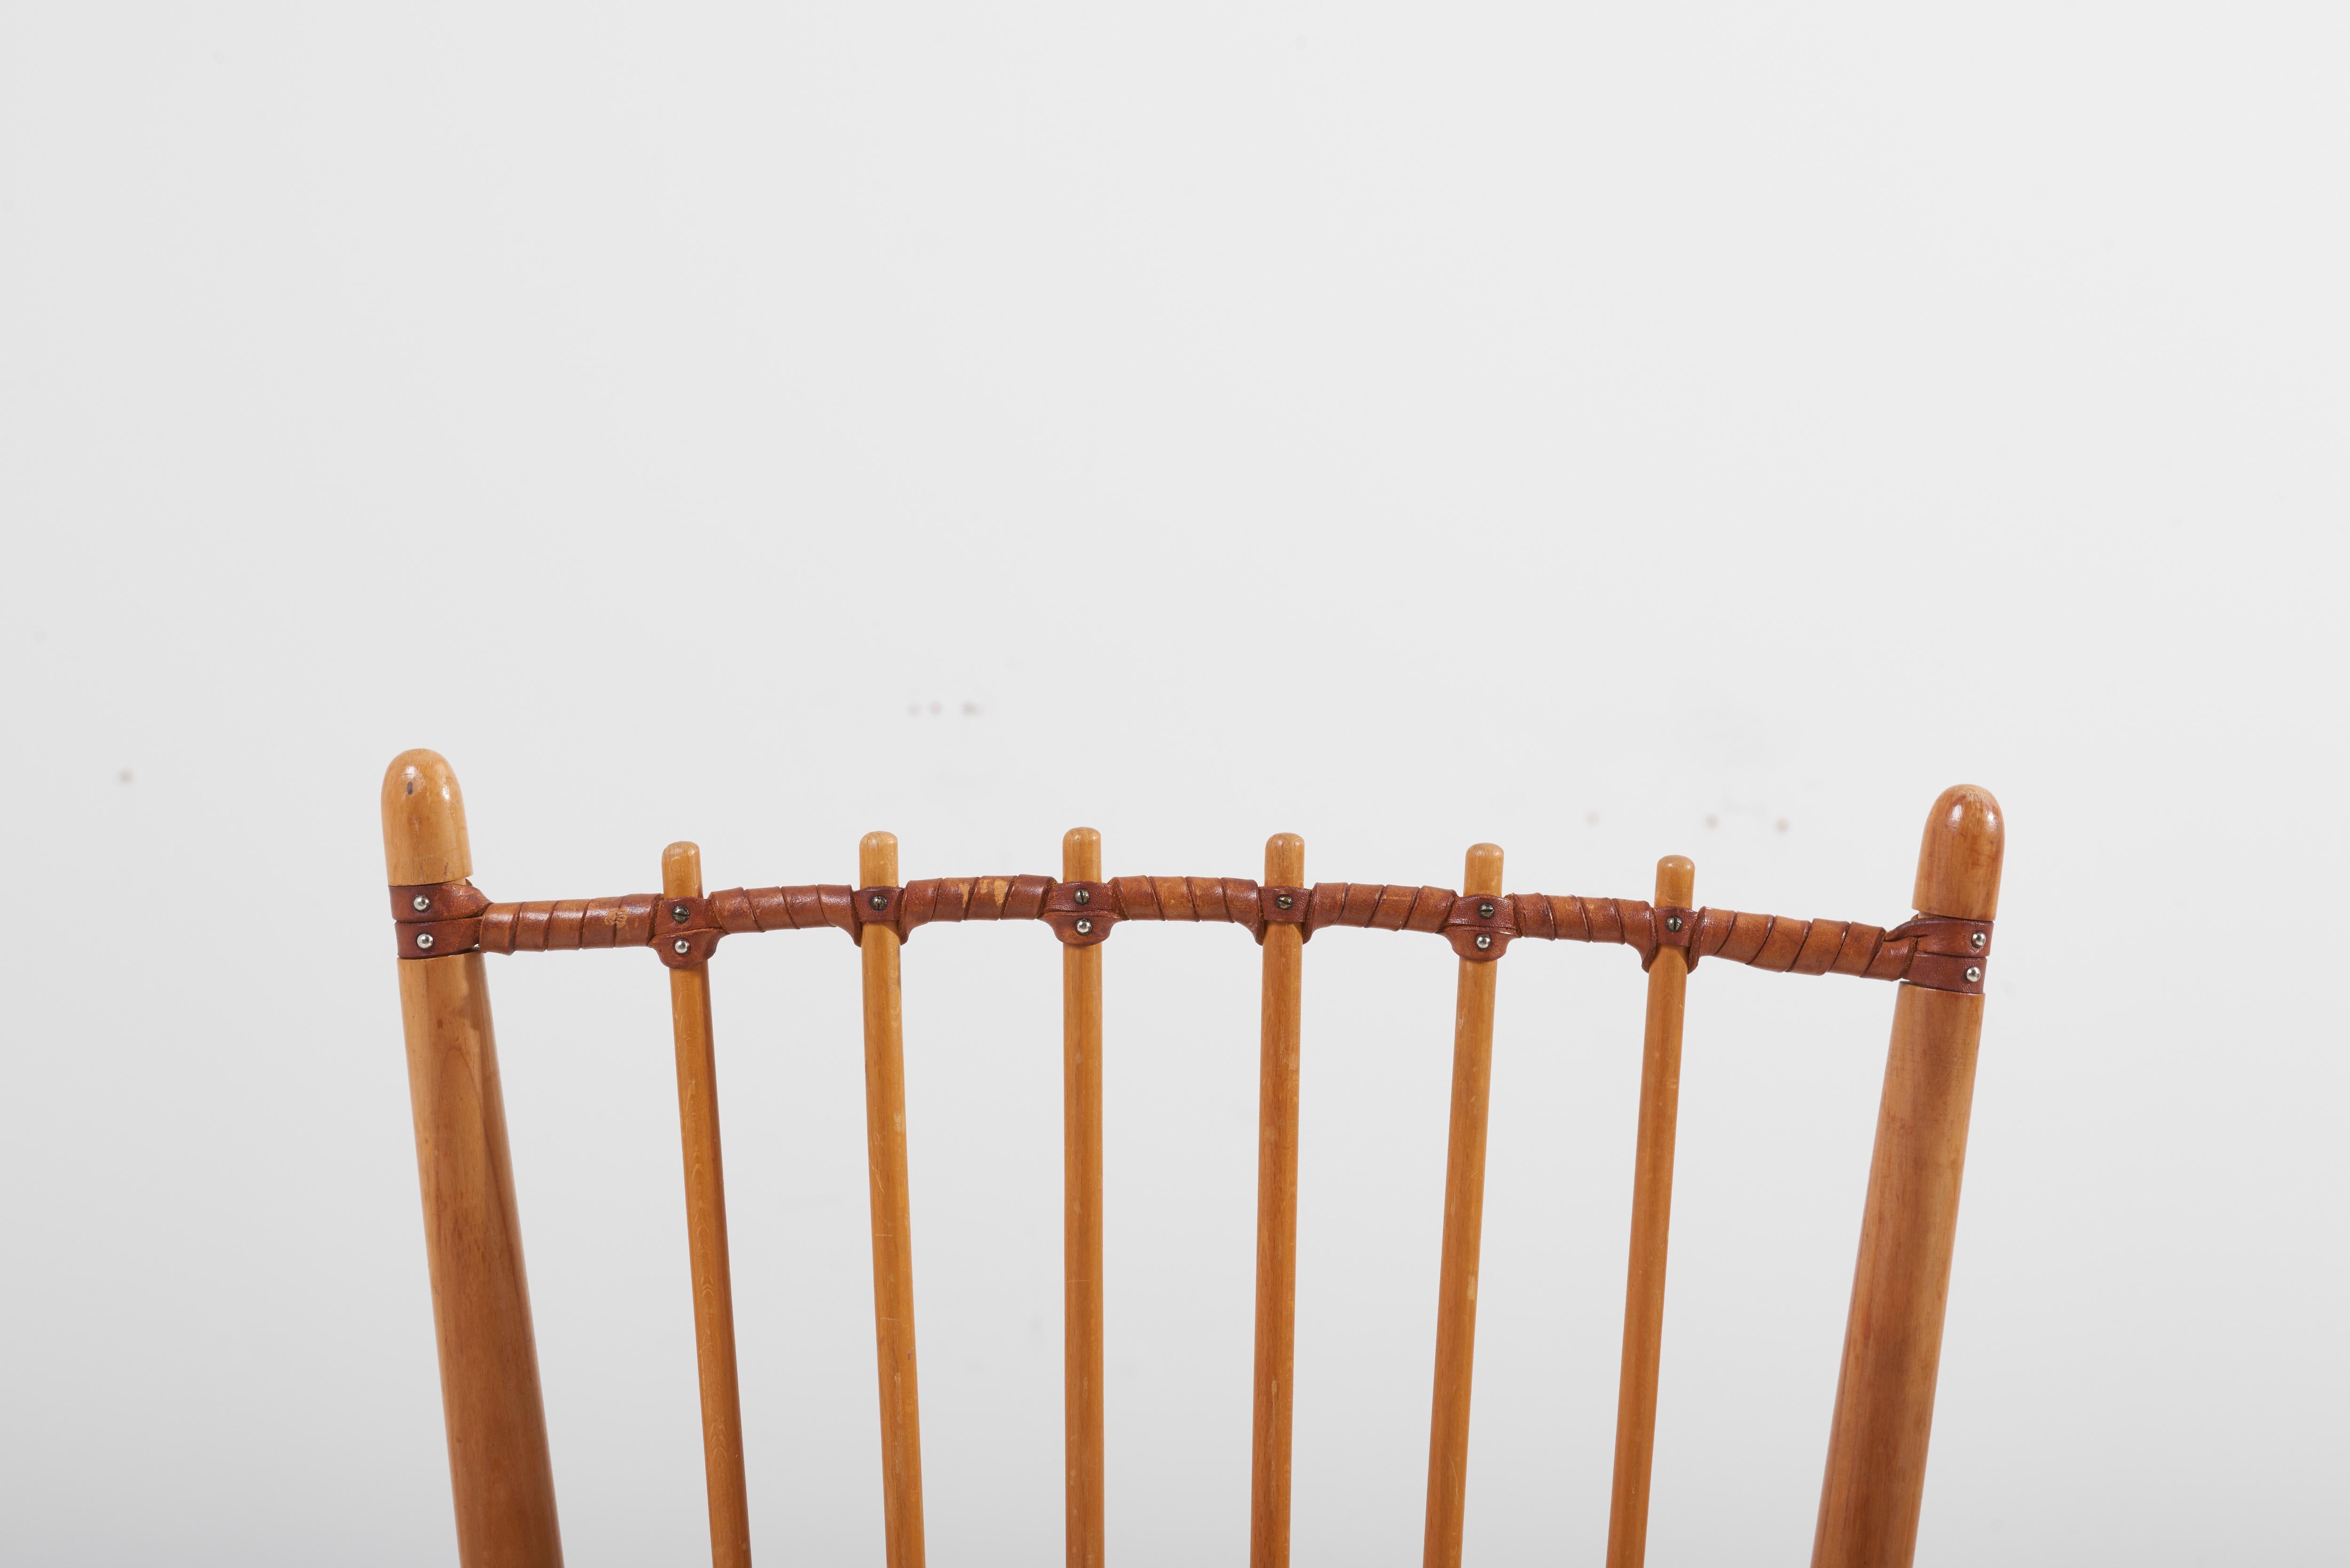 Pair of wooden dining chairs, designed in 1950s by Albert Haberer and manufactured by Hermann Fleiner.
Beautiful detail is the leather connection between the spindles that also gives the backrest both strength and flexibility. Craftsmanship, made